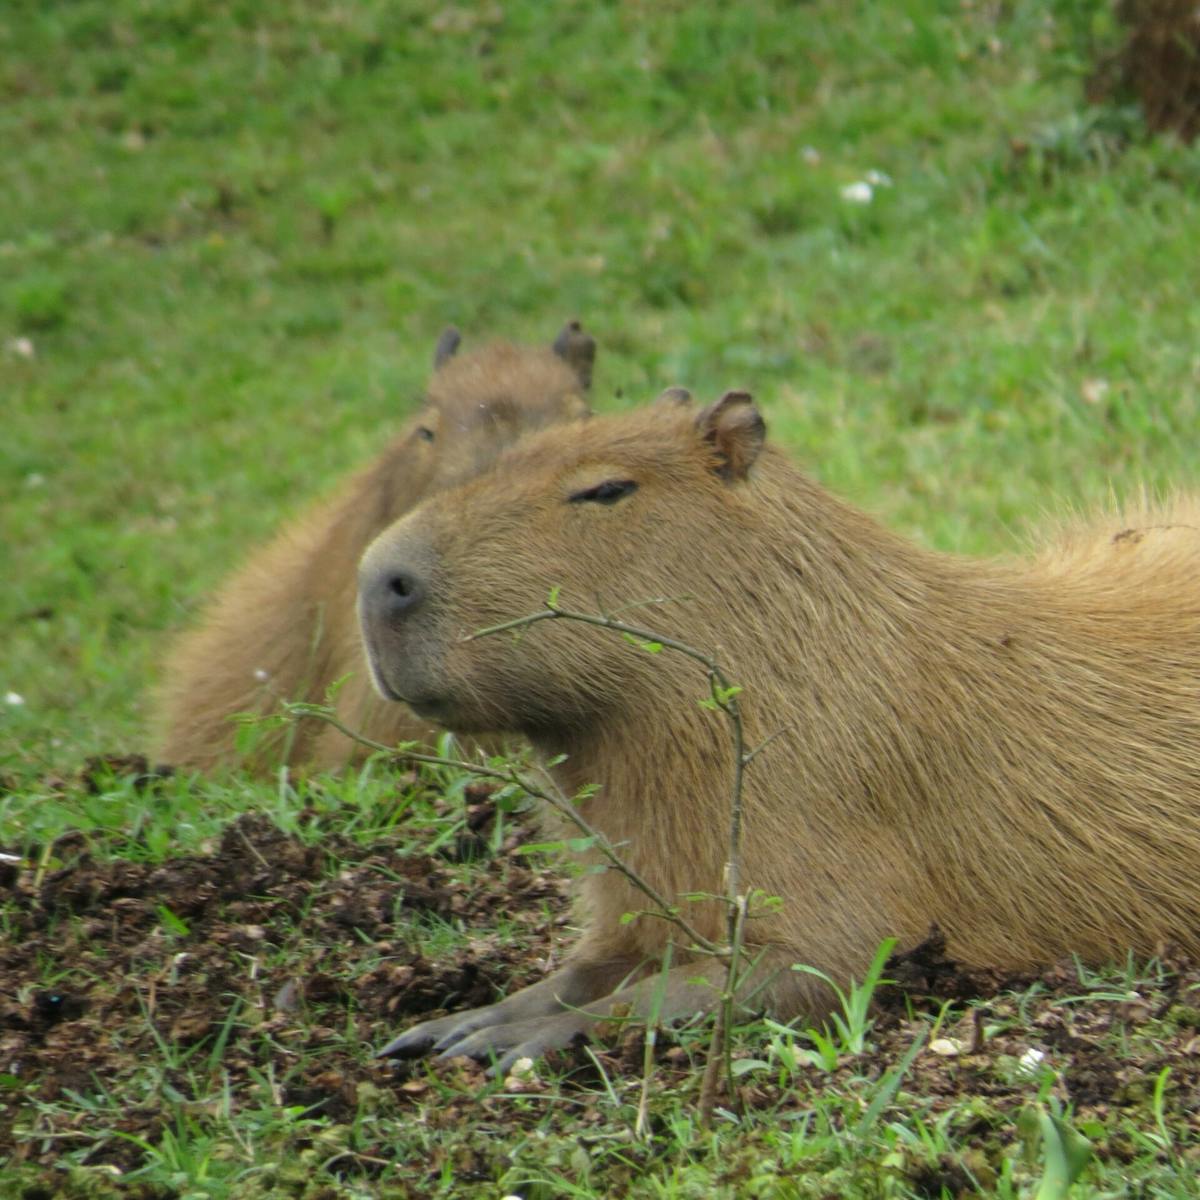 a rodent in a grassy field